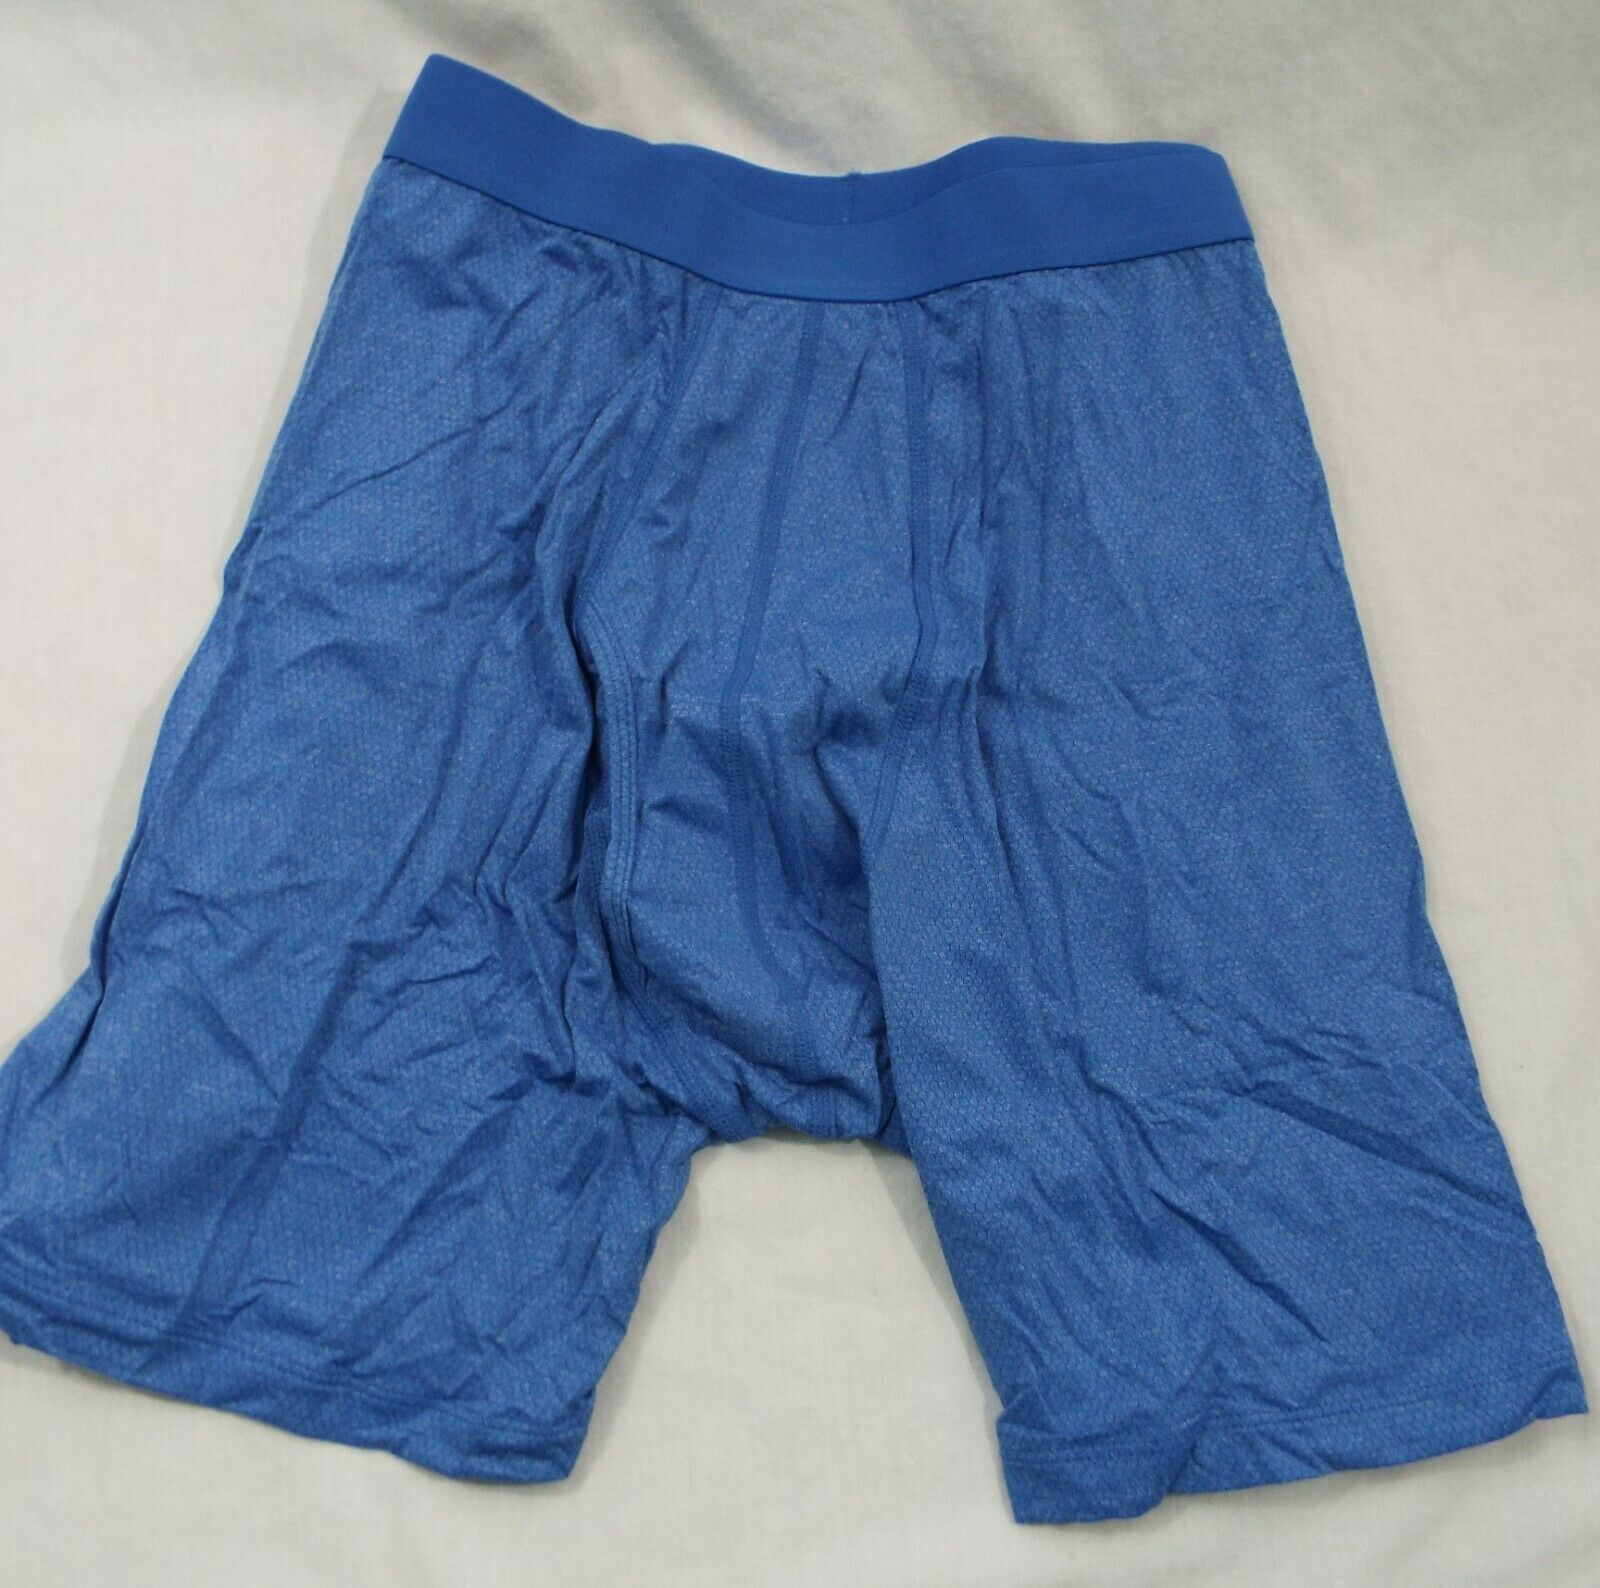 Duluth Trading Co Bullpen Corralling Boxer Briefs in Baltic Blue 56209 ...